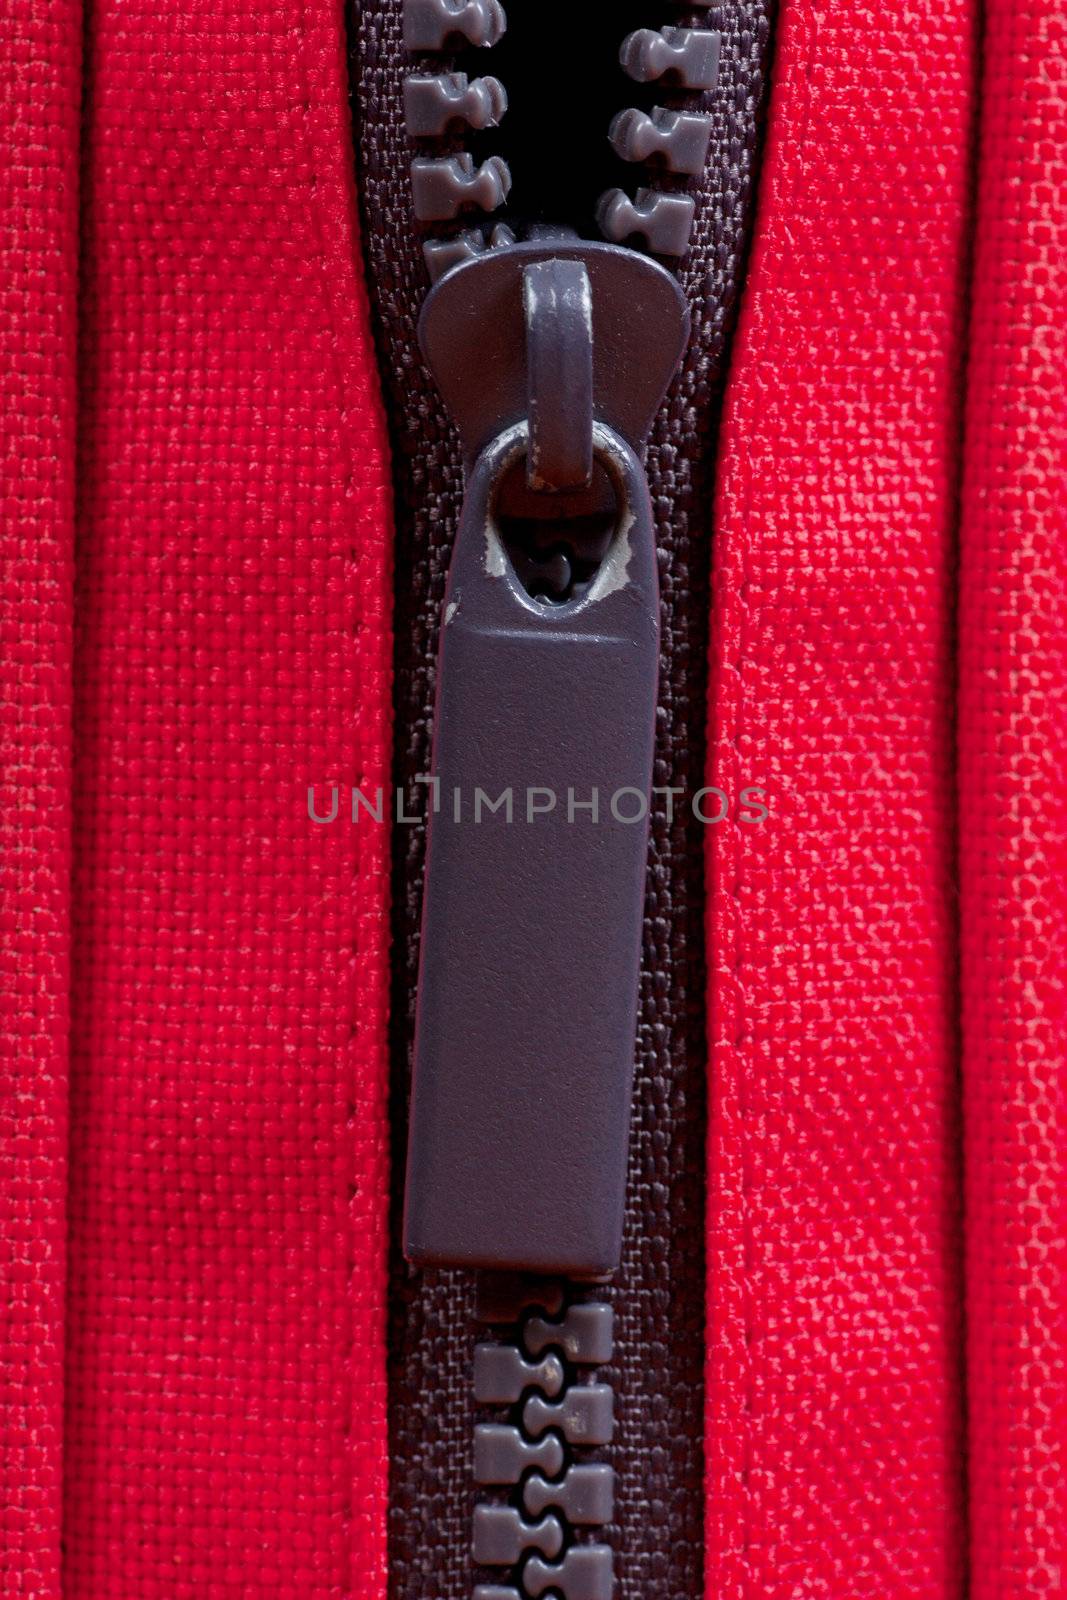 Close-up of a half-opened zipper on a red bag.